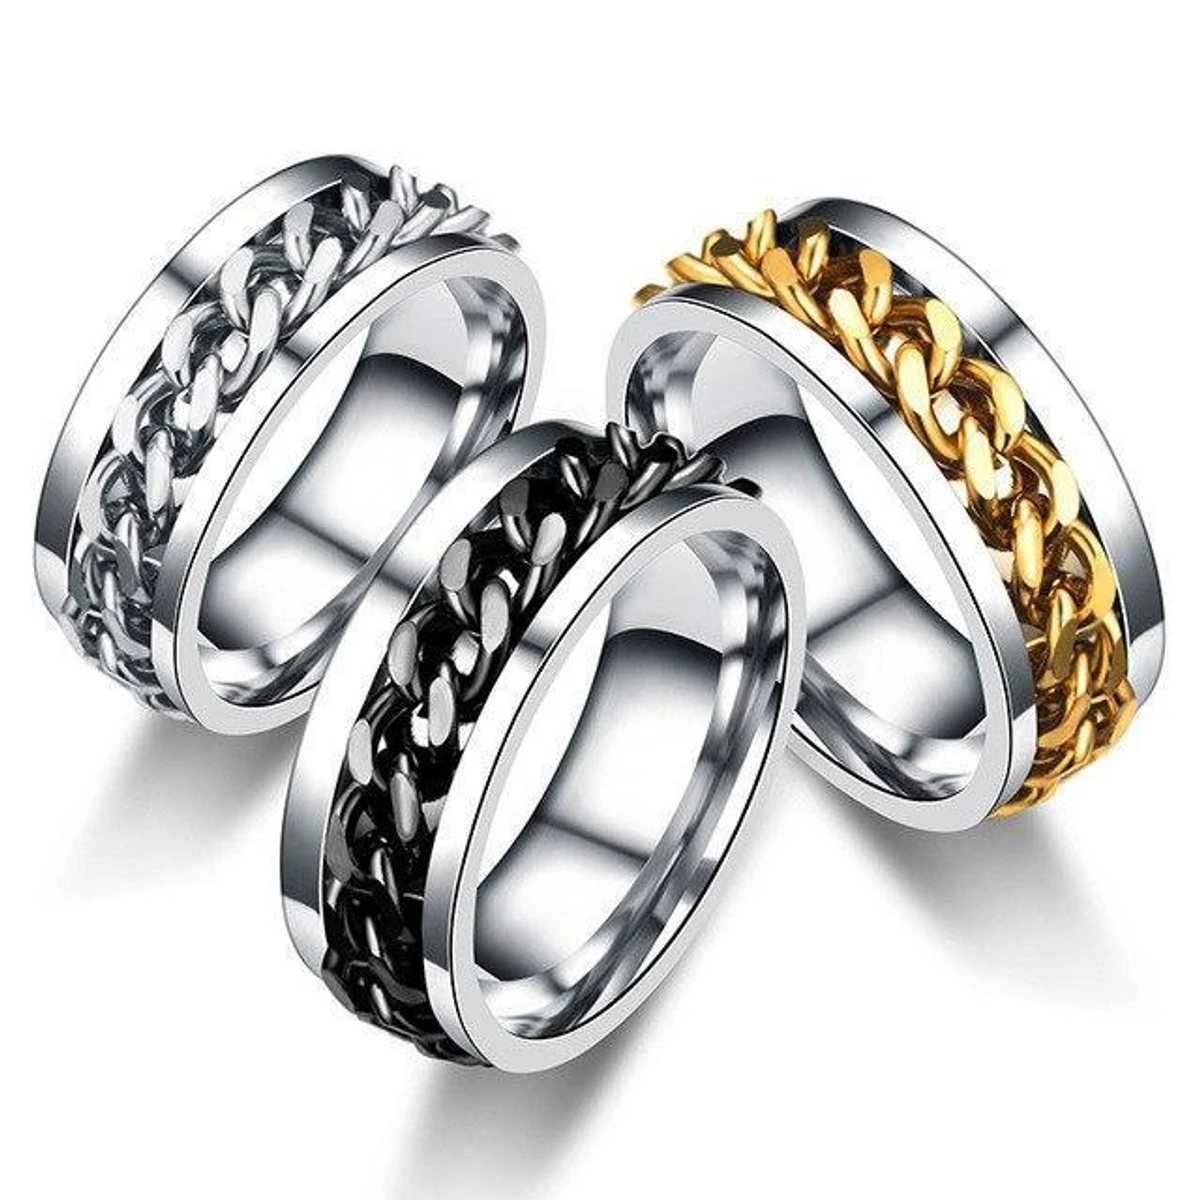 Stylish Stainless Steel Ring Fashion Finger Ring